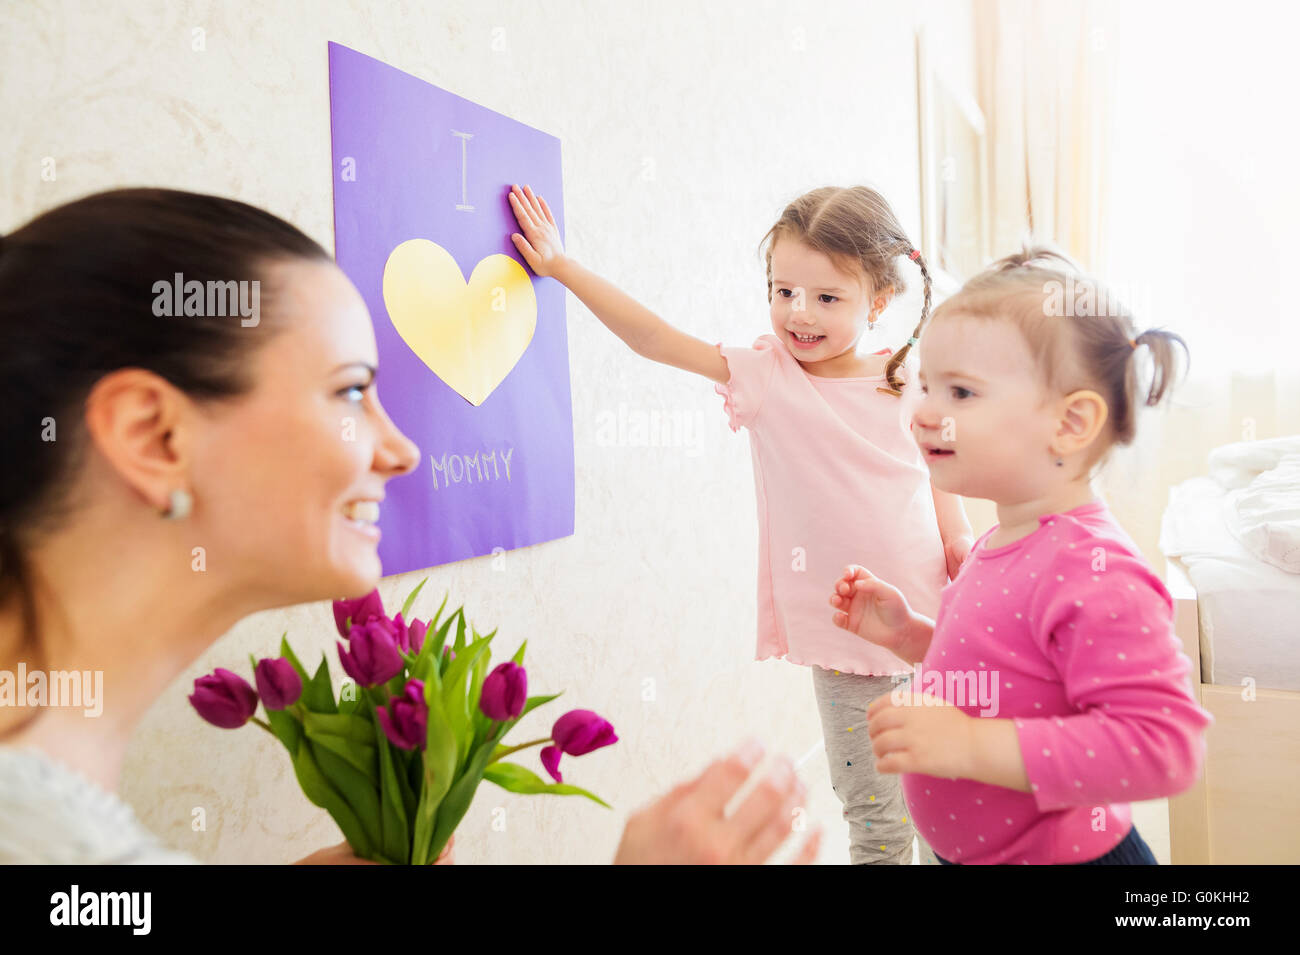 Mothers day, girls giving flowers and card to their mum Stock Photo